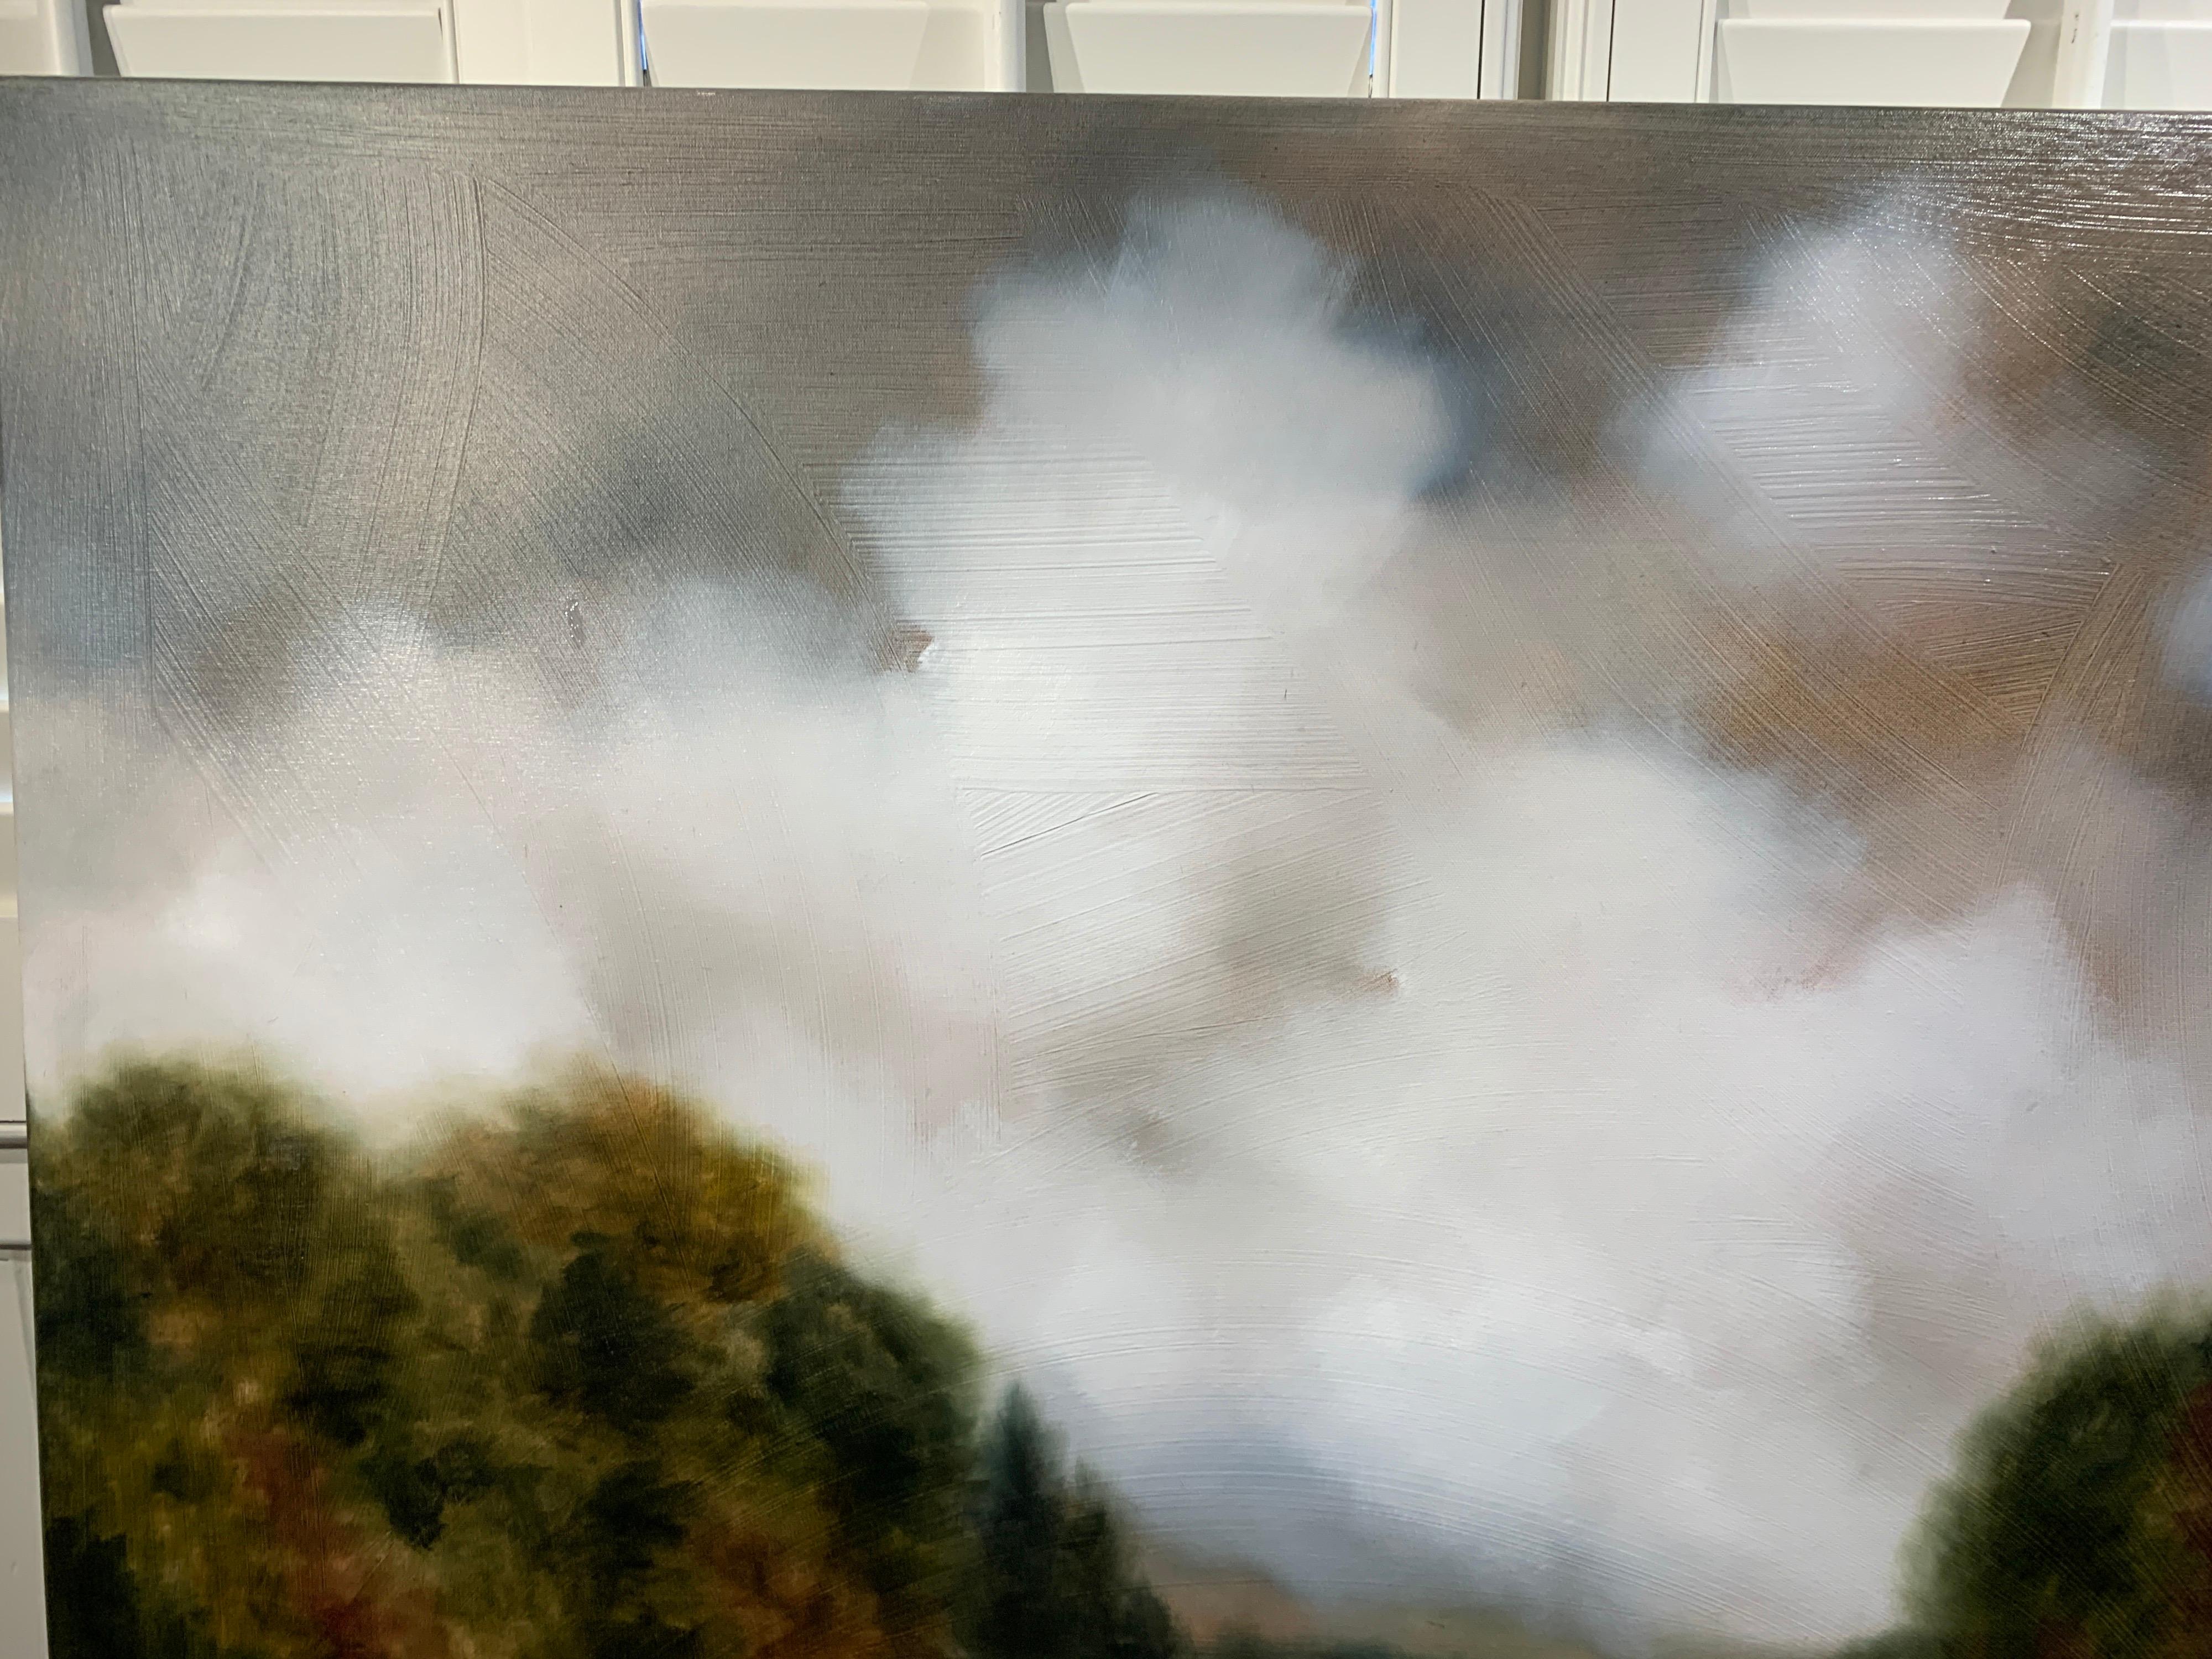 'Whispering Meadow' is a large Impressionist oil on gessoed canvas landscape painting created by American artist Andrea Costa in 2020. Featuring a soft and warm palette palette mostly made of grey, rust, green light blue and white colors, this